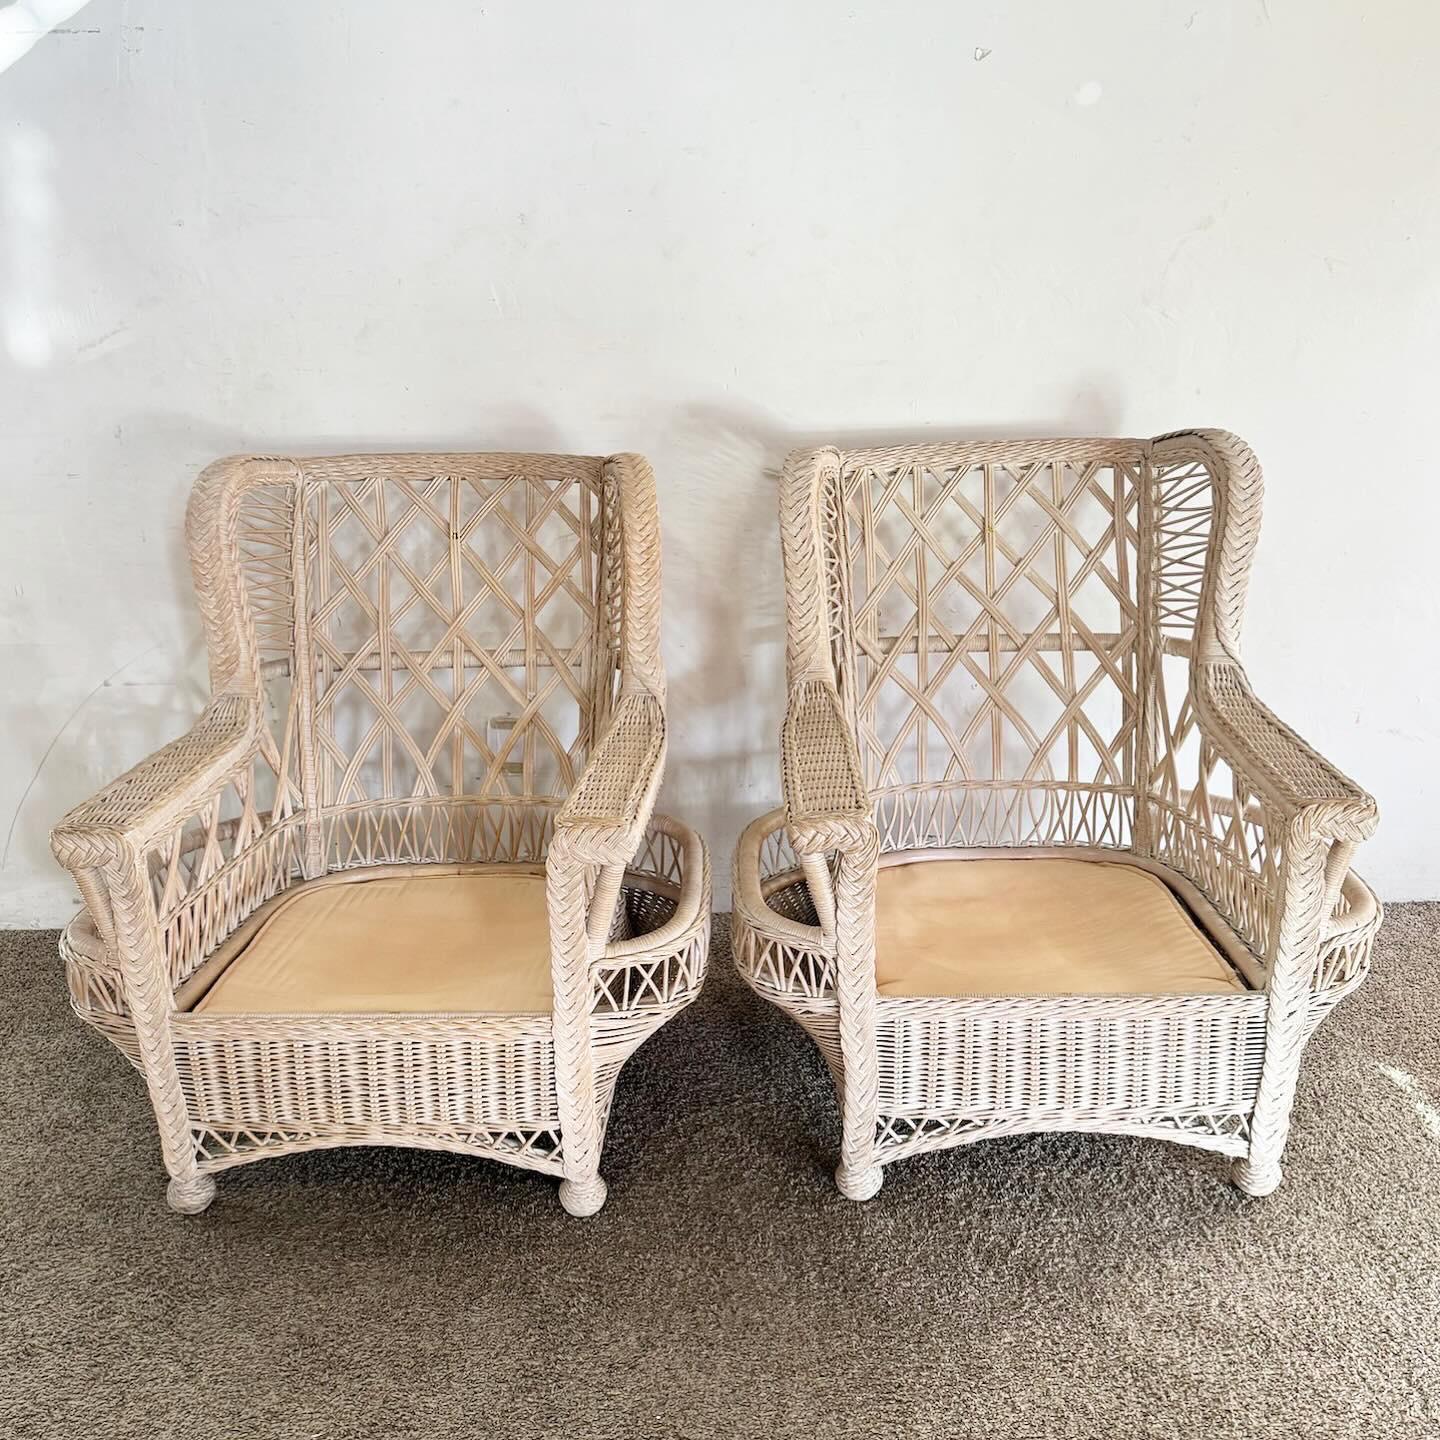 20th Century Boho Chic Wicker Rattan Lounge Chairs With Ottoman - 3 Pieces For Sale